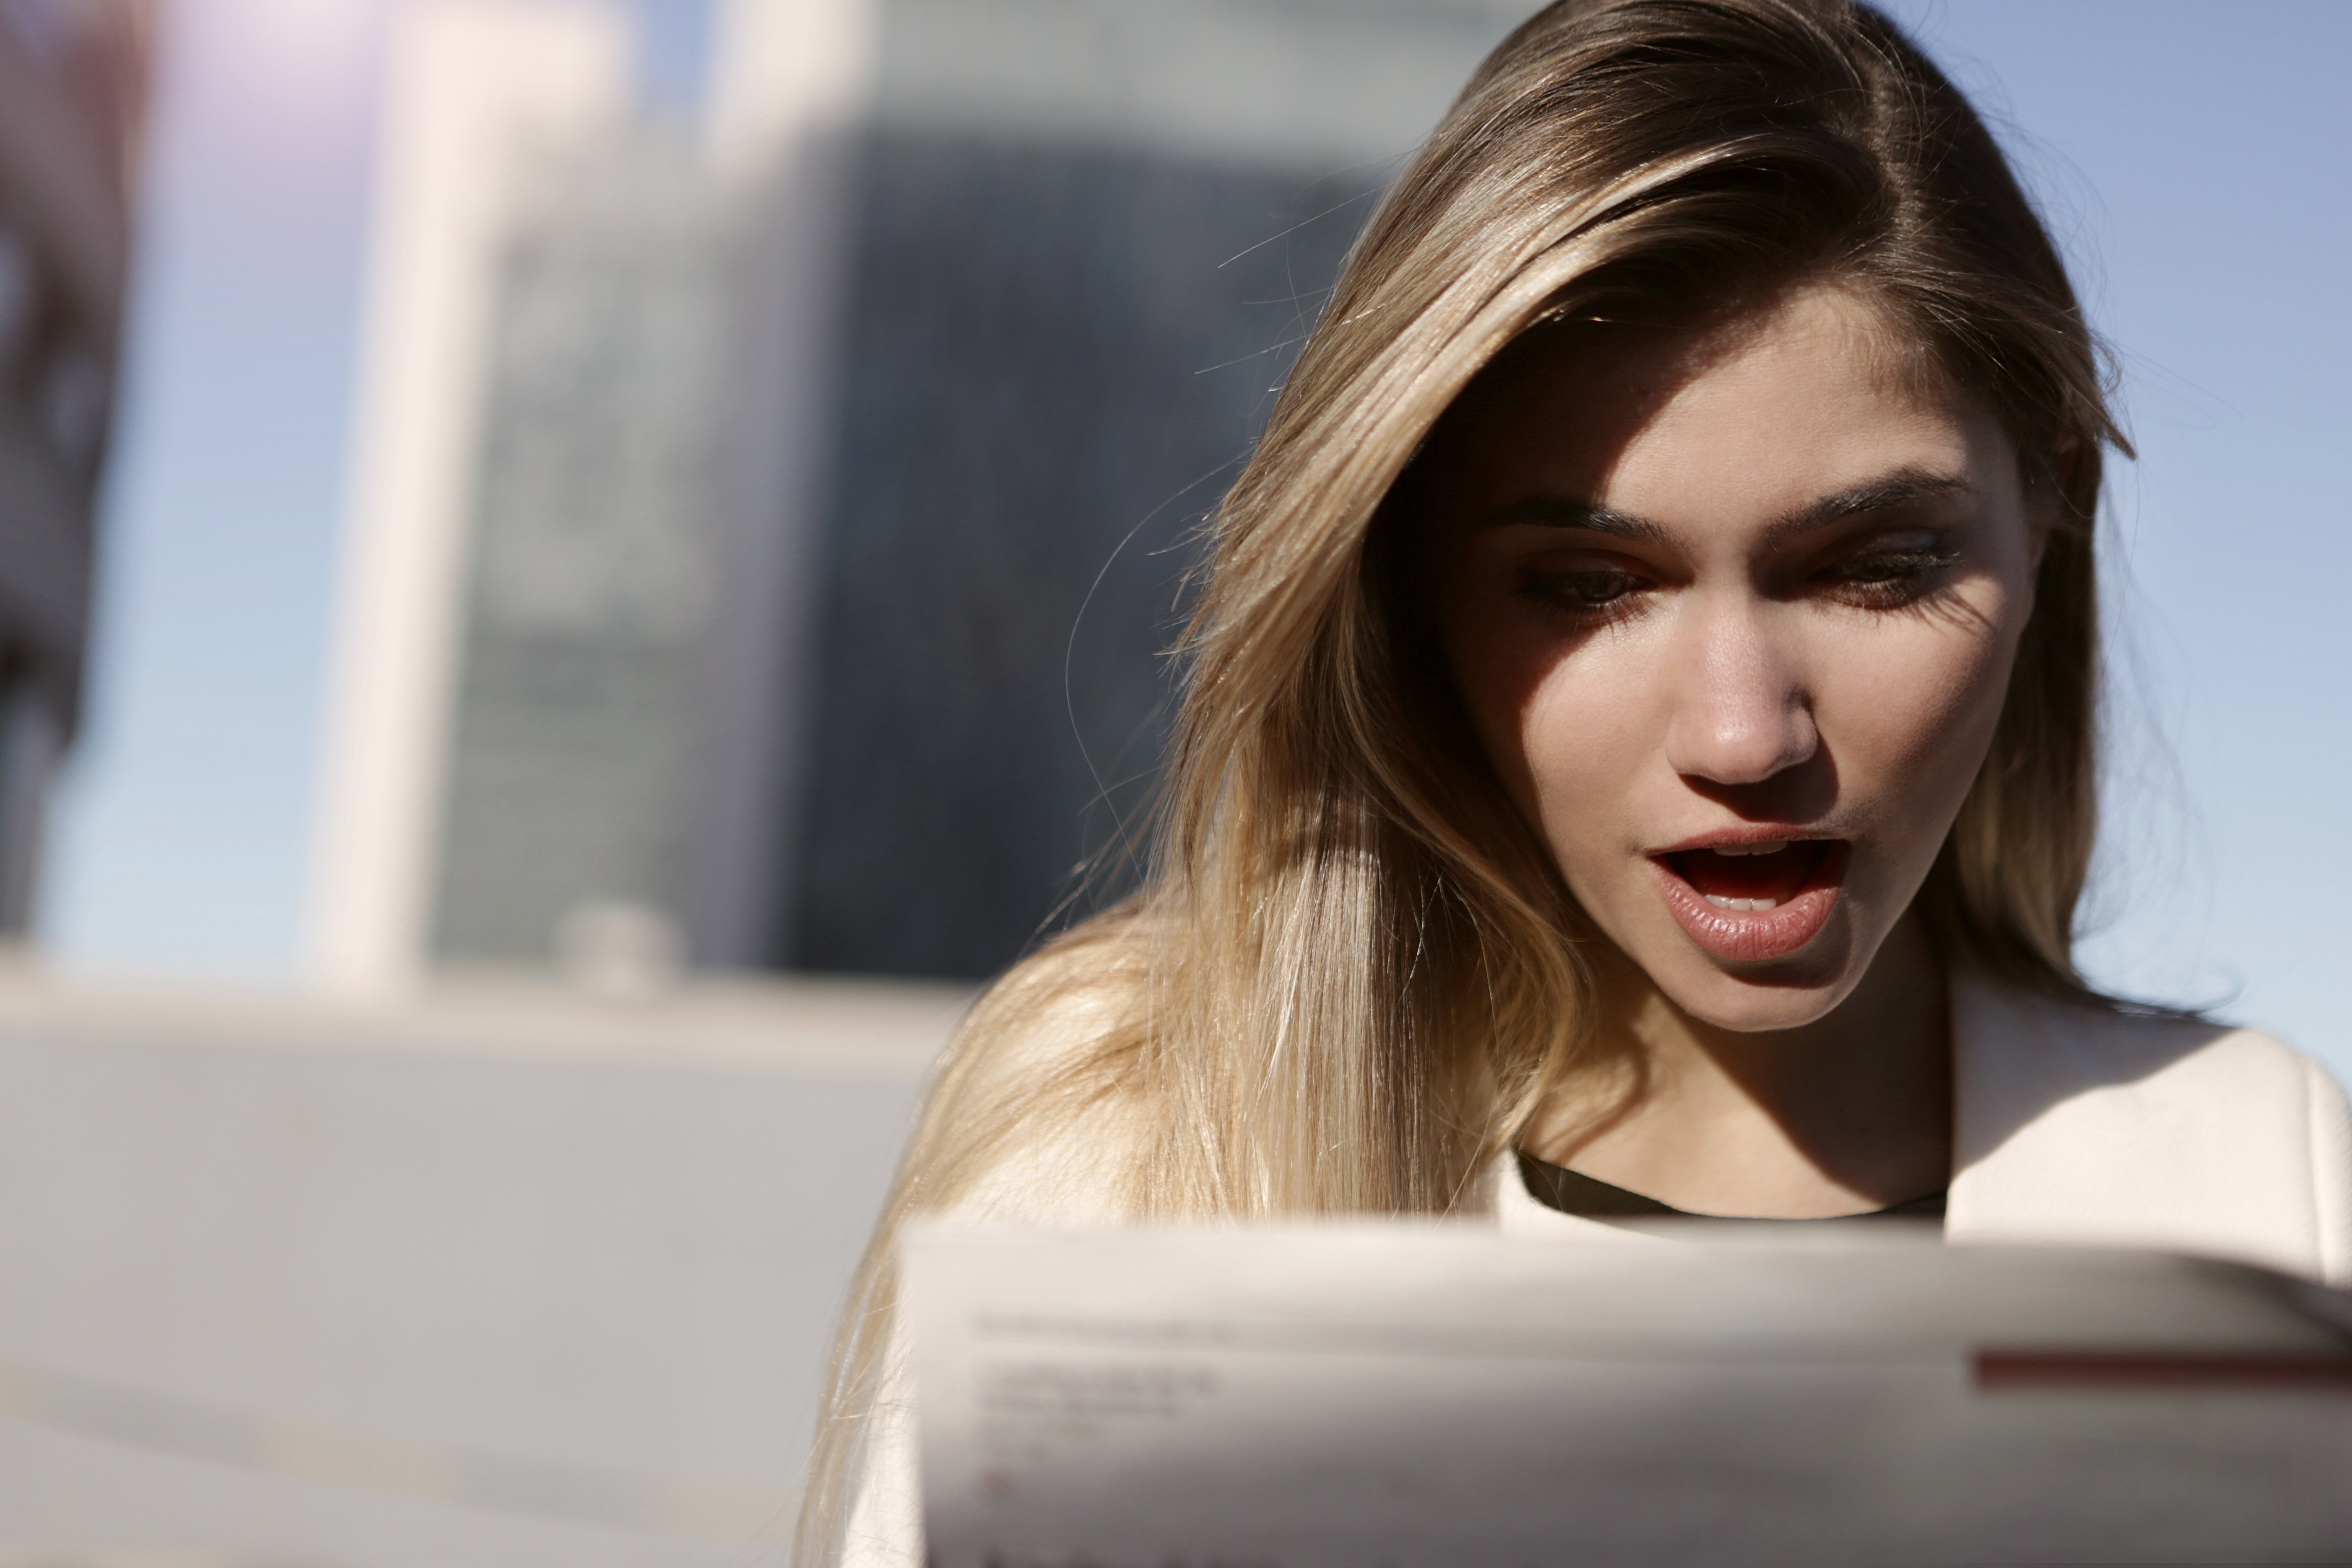 Laura was shocked after reading the letter. | Source: Pexels